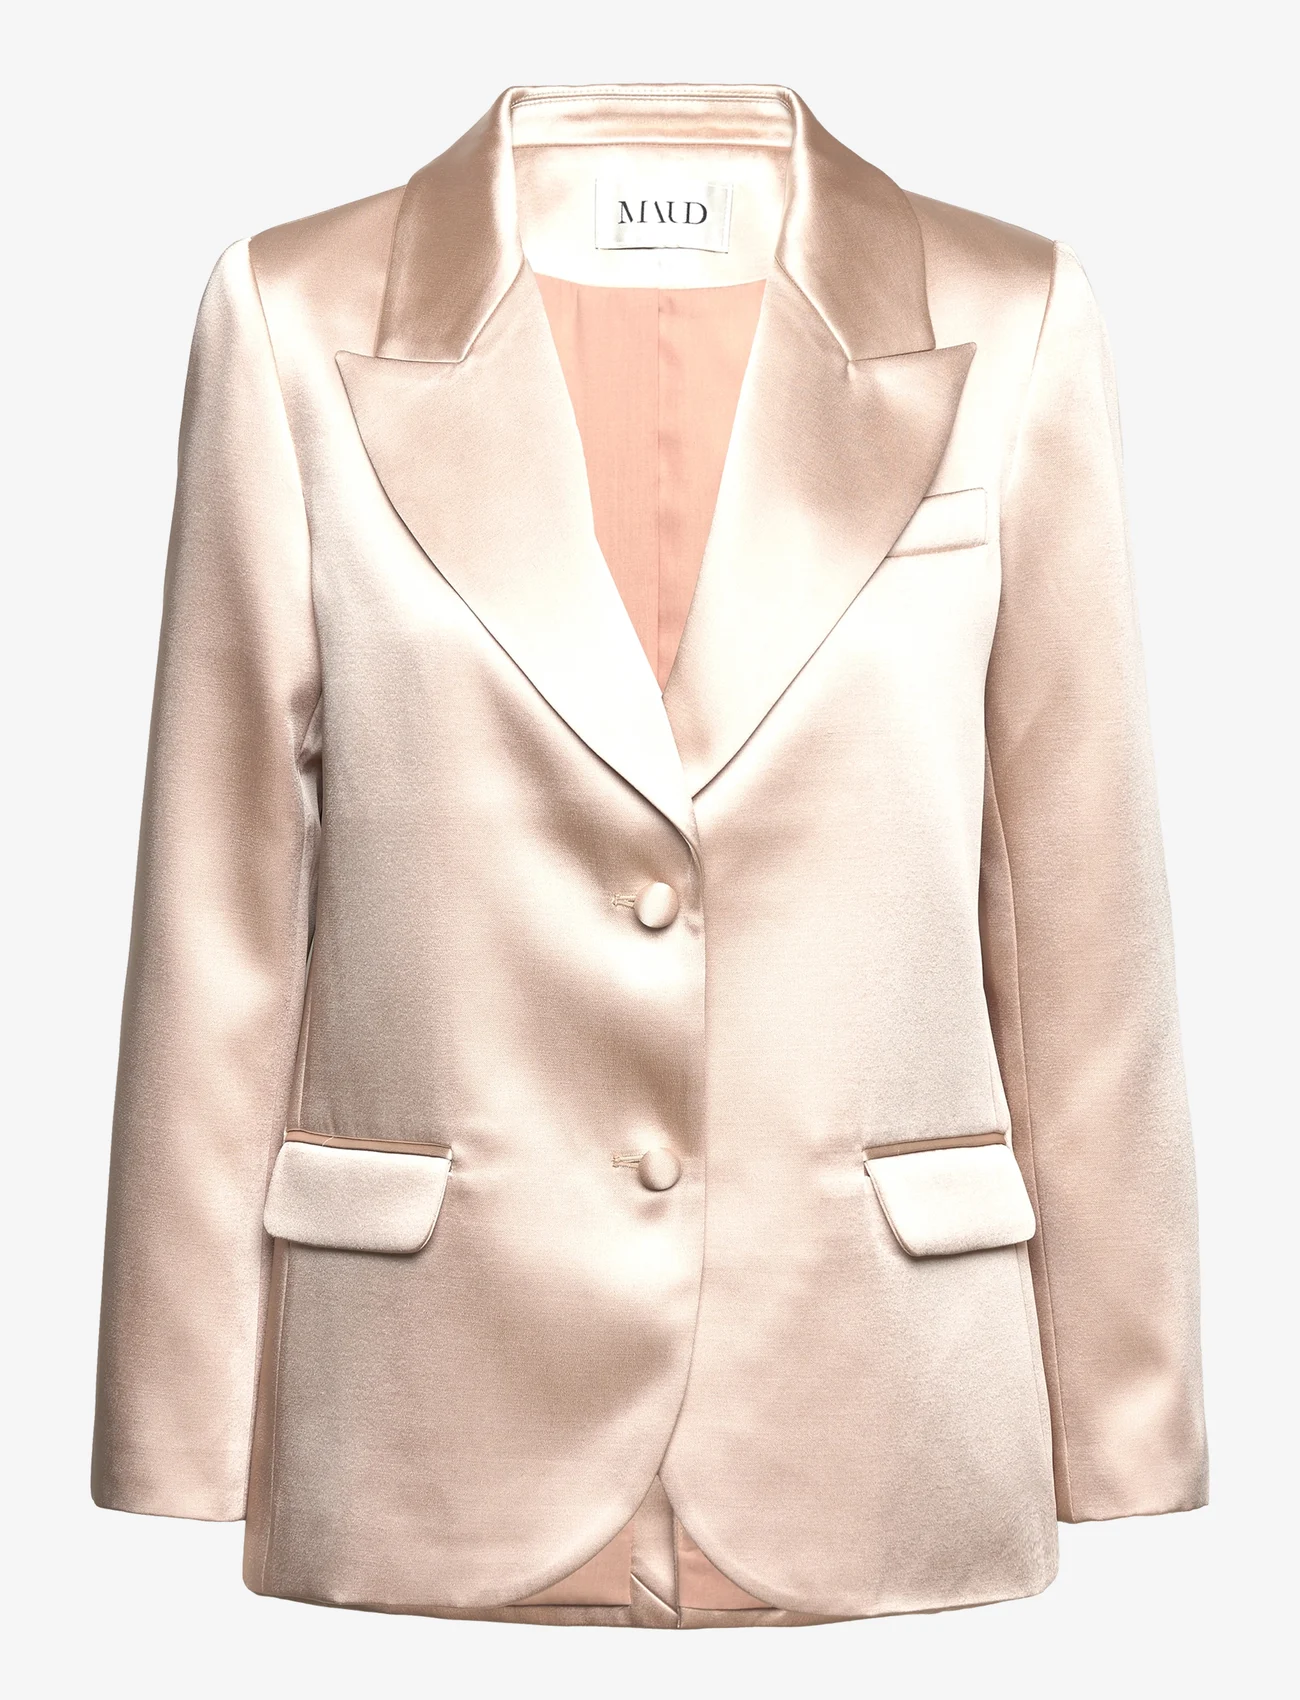 MAUD - Elvira Blazer - party wear at outlet prices - sand - 0